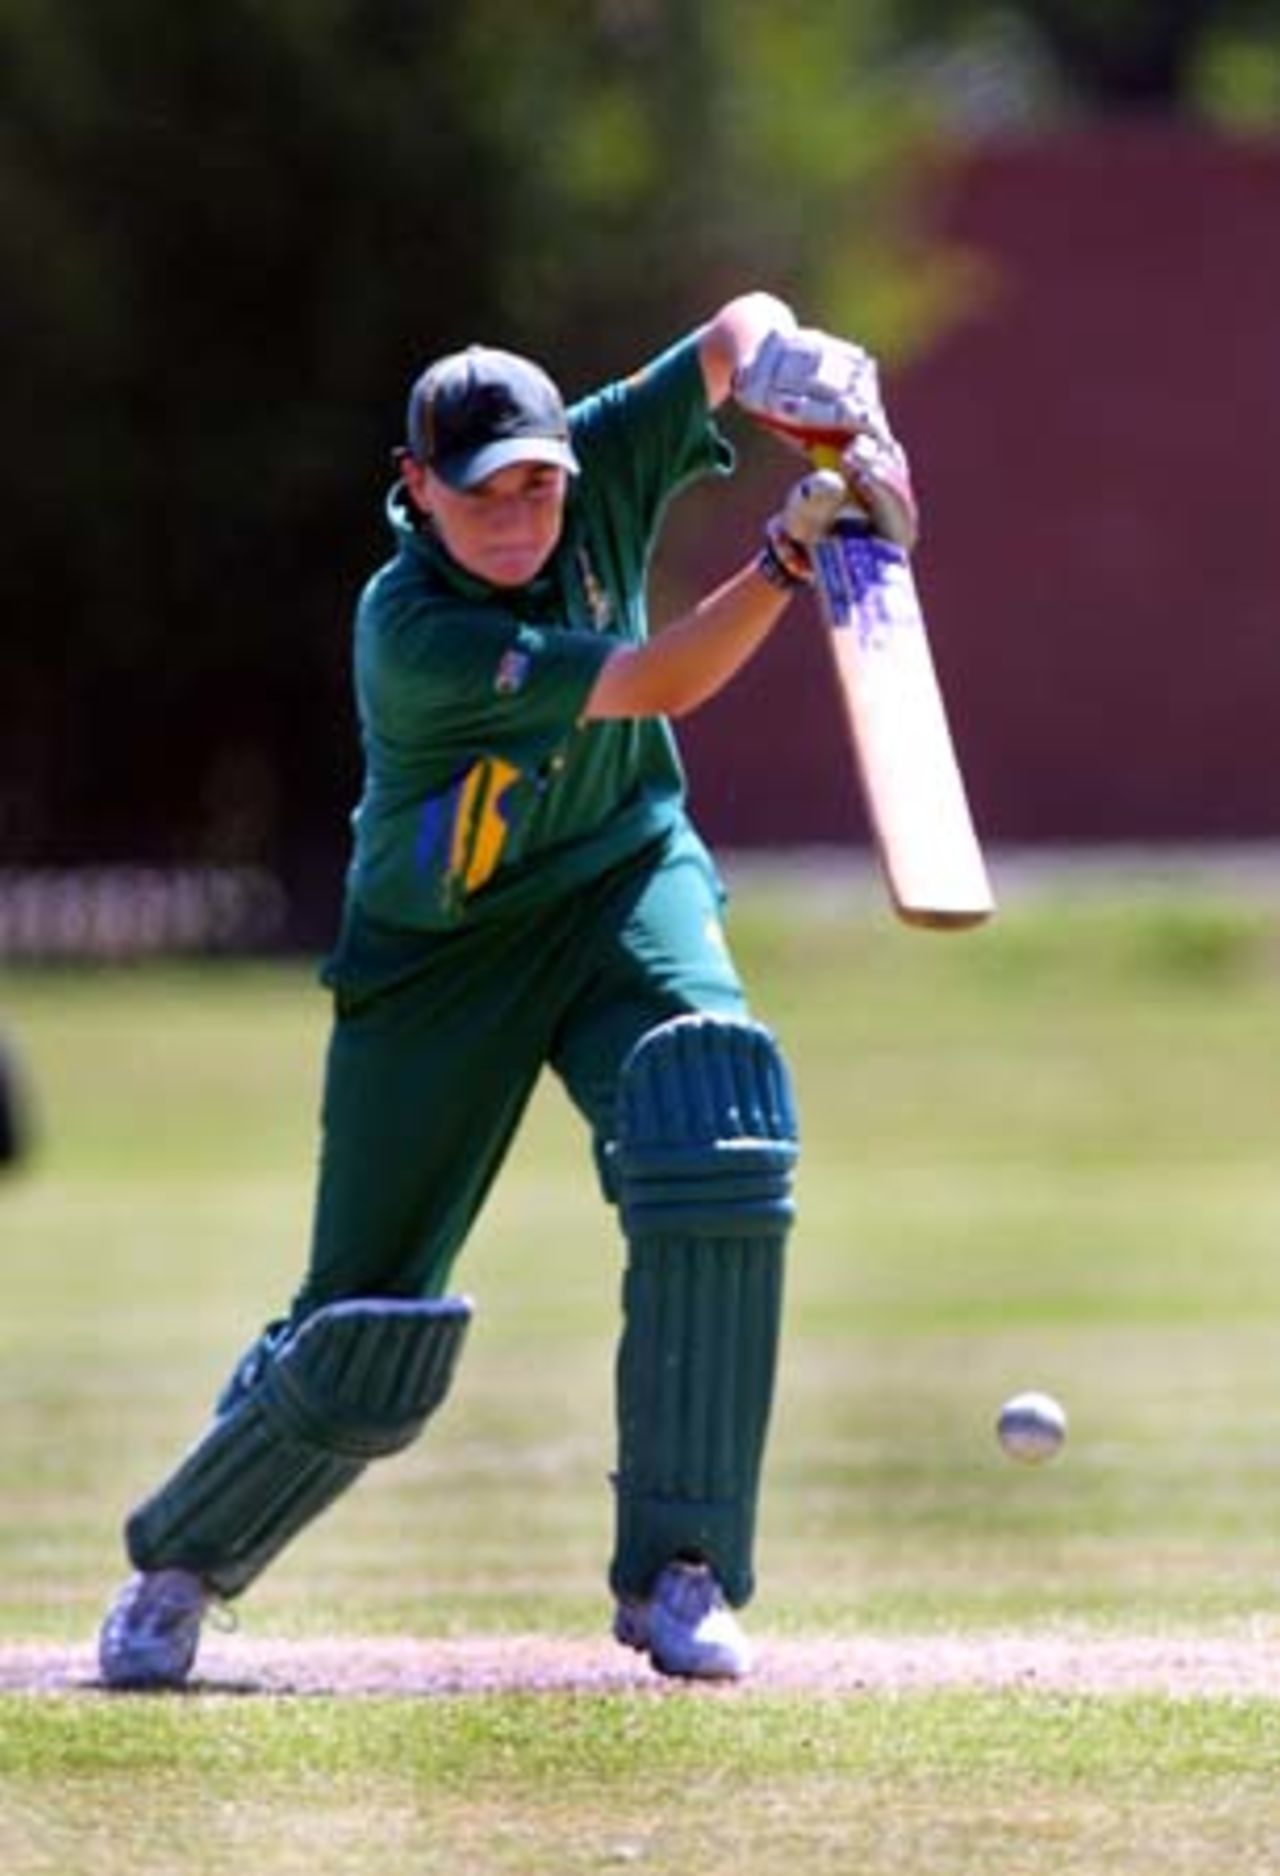 Ireland v South Africa at the 2000 Women's World Cup , played at the Hagley Oval ,16th December